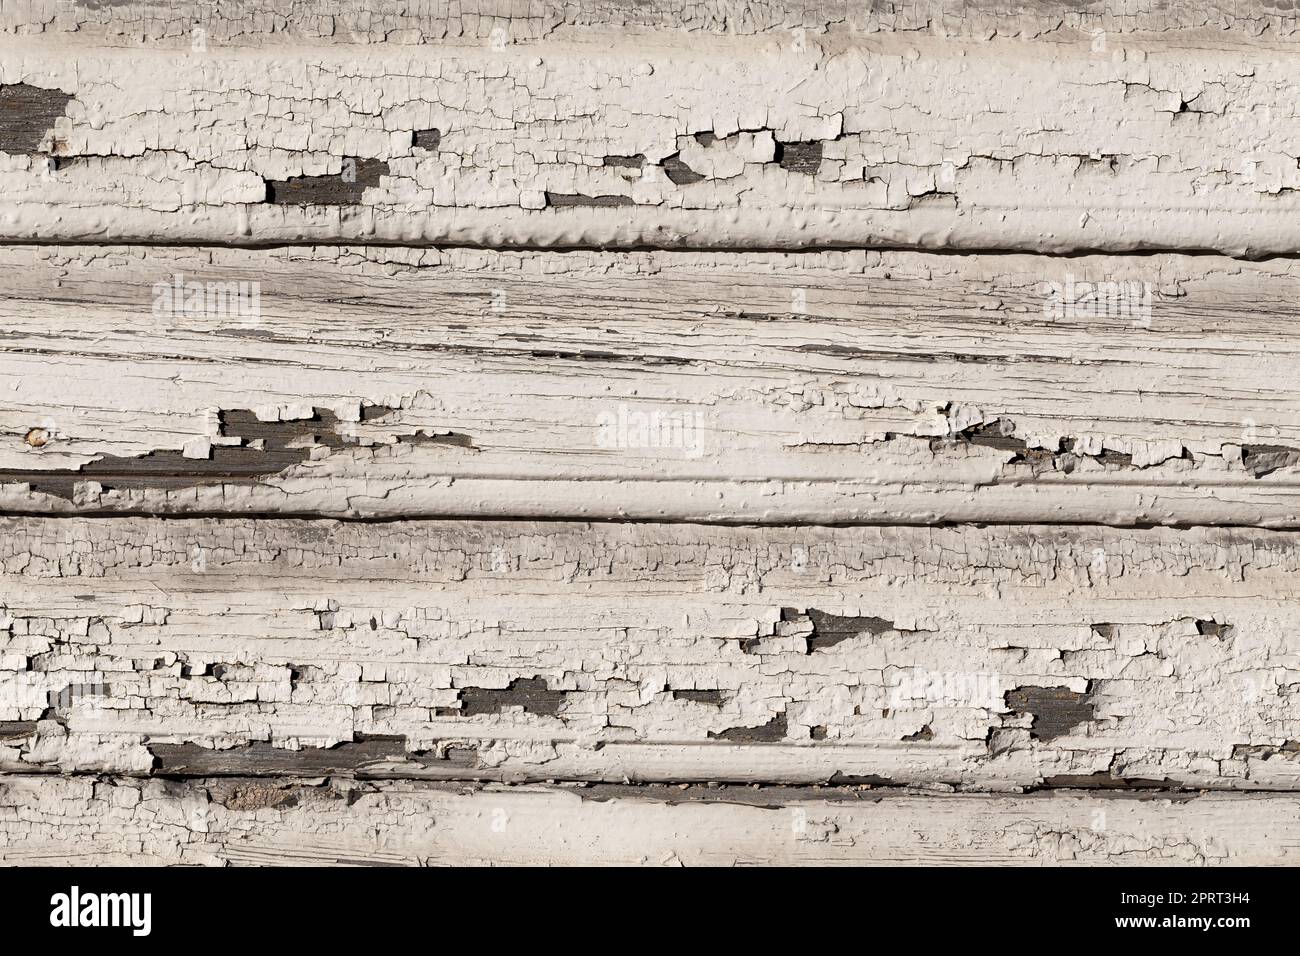 Wooden wall with white paint Stock Photo